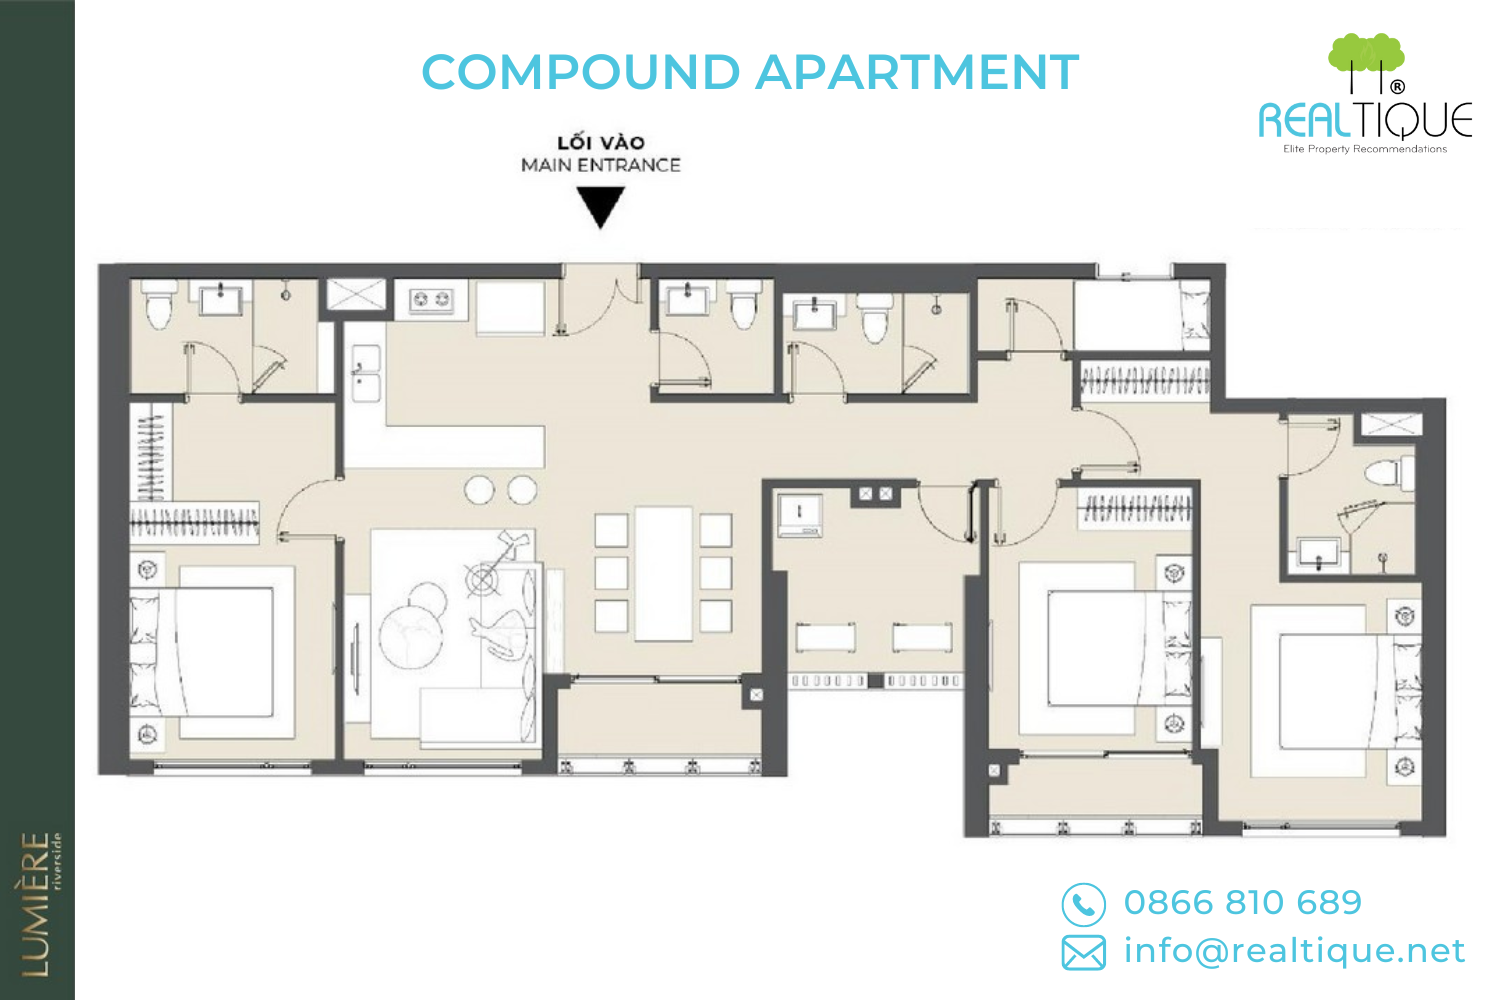 Layout compound apartment in LUMIÈRE riverside project